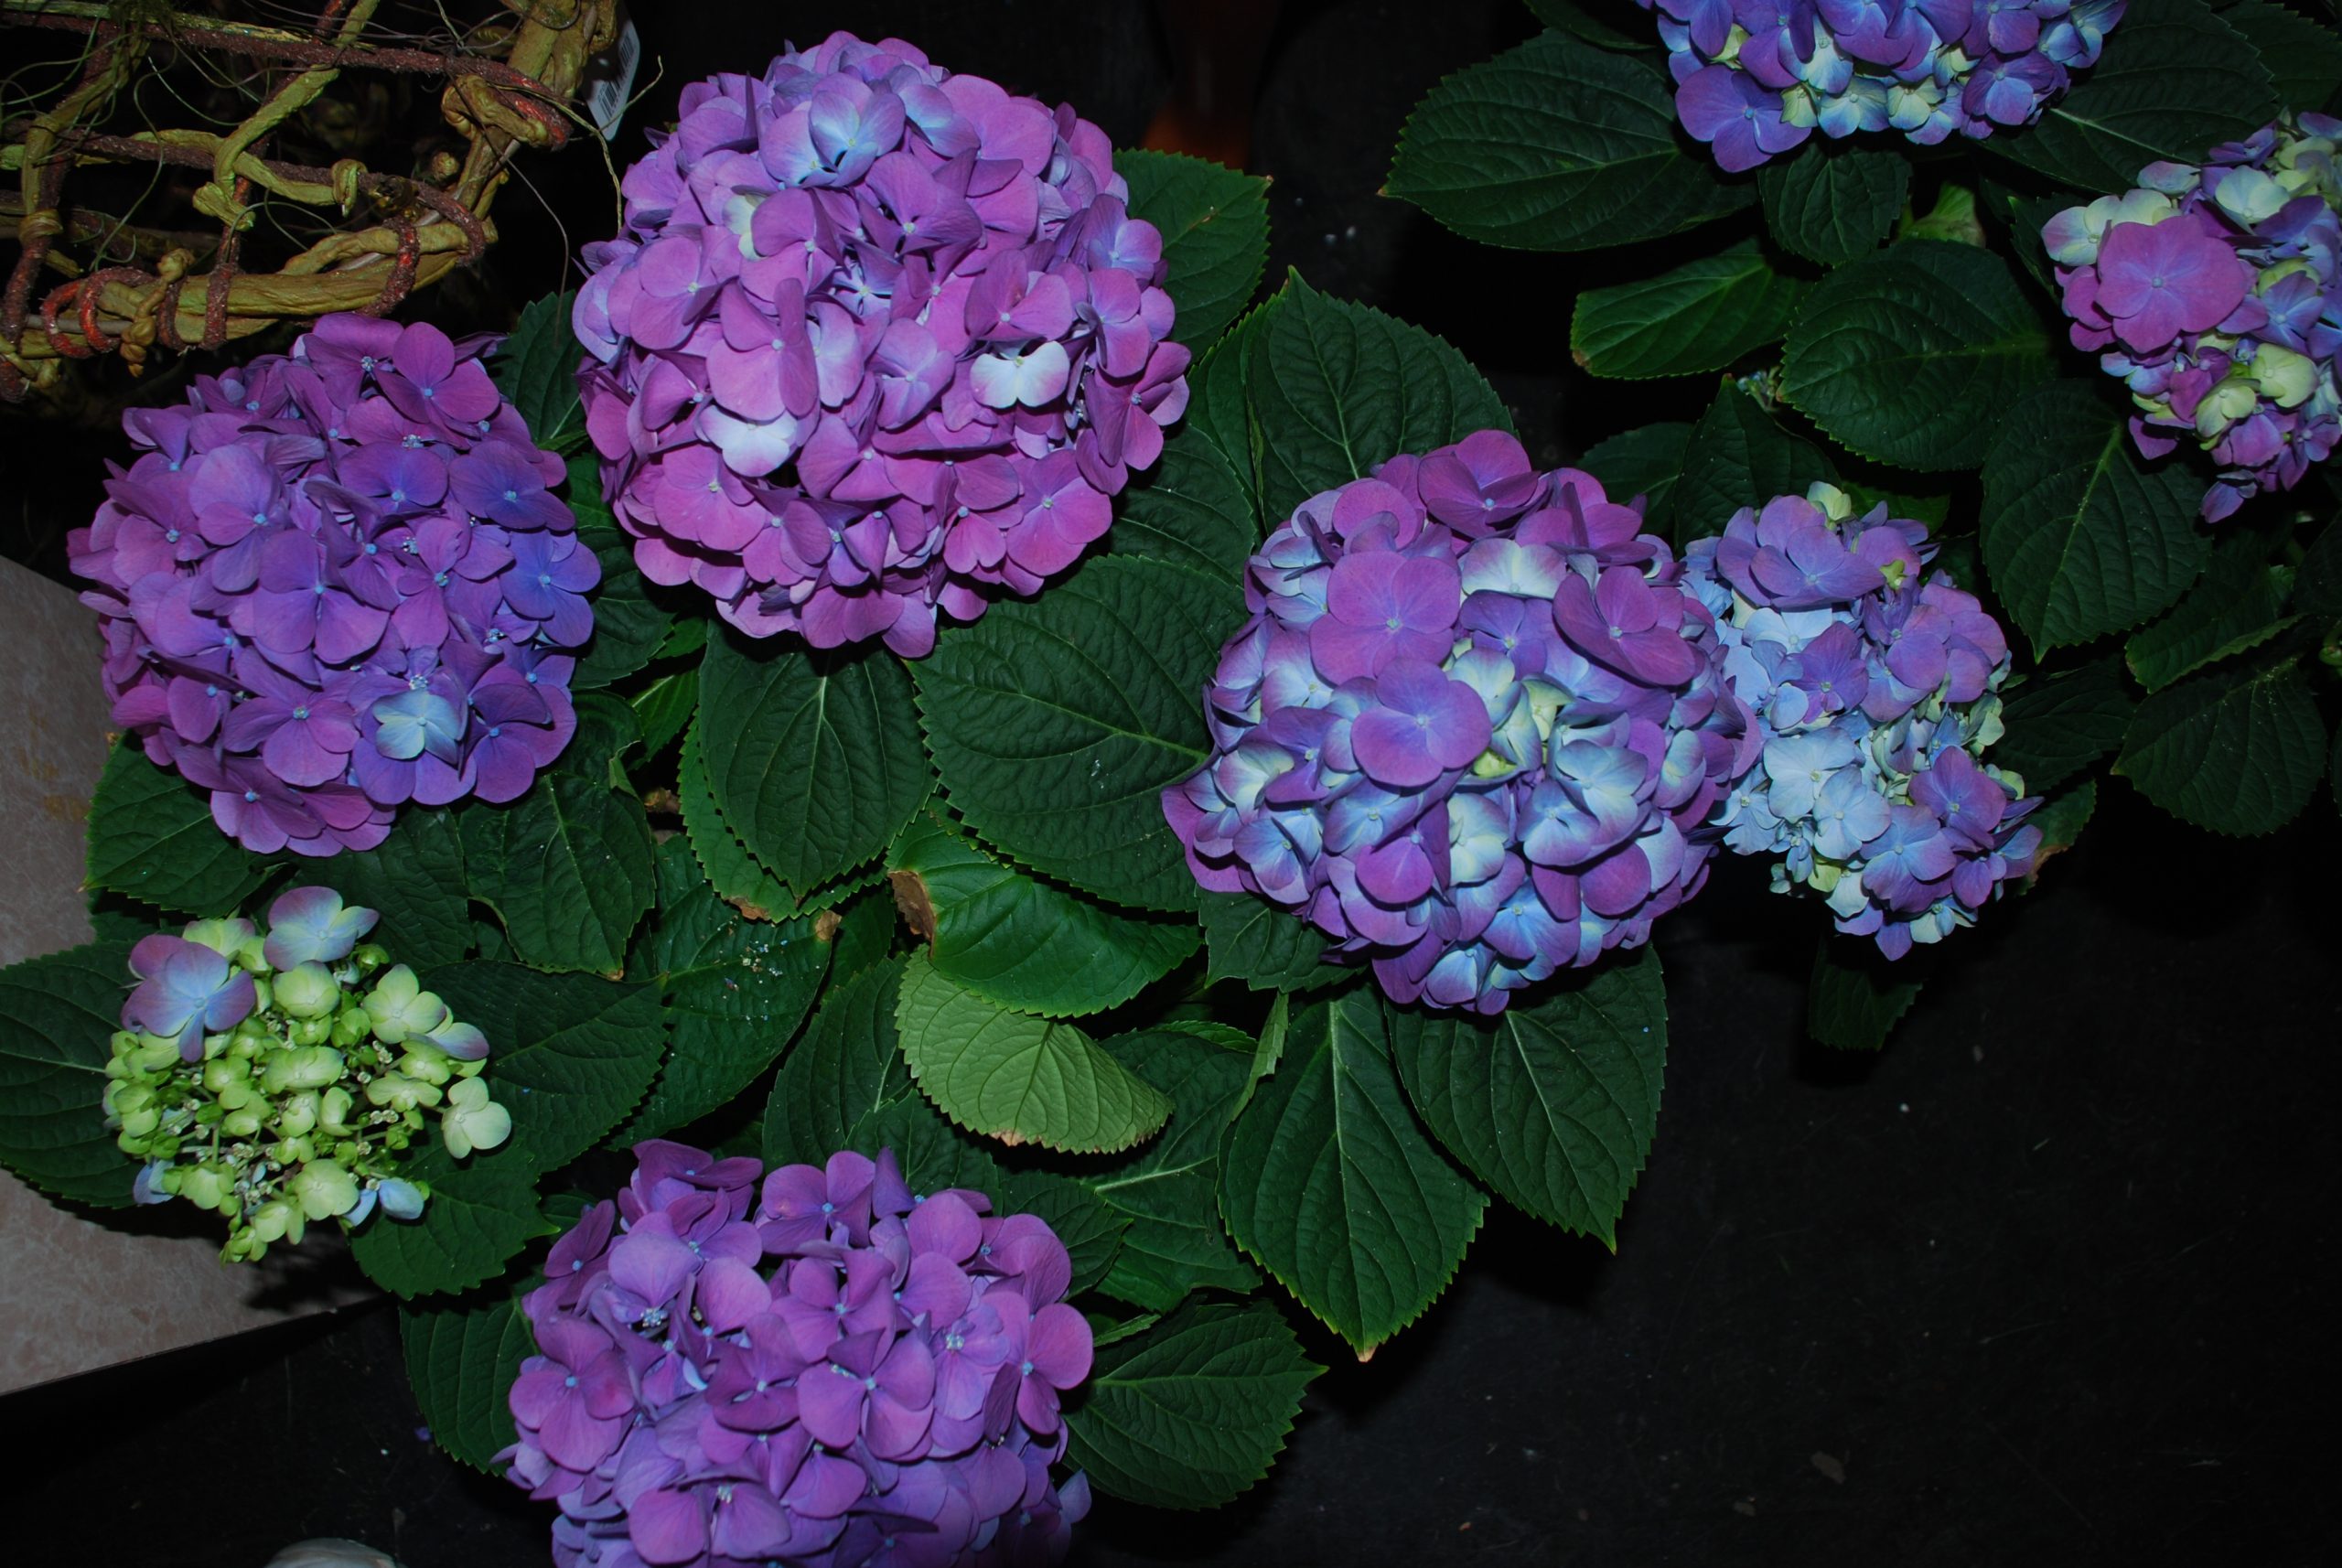 Hydrangea in Bloom (user submitted)